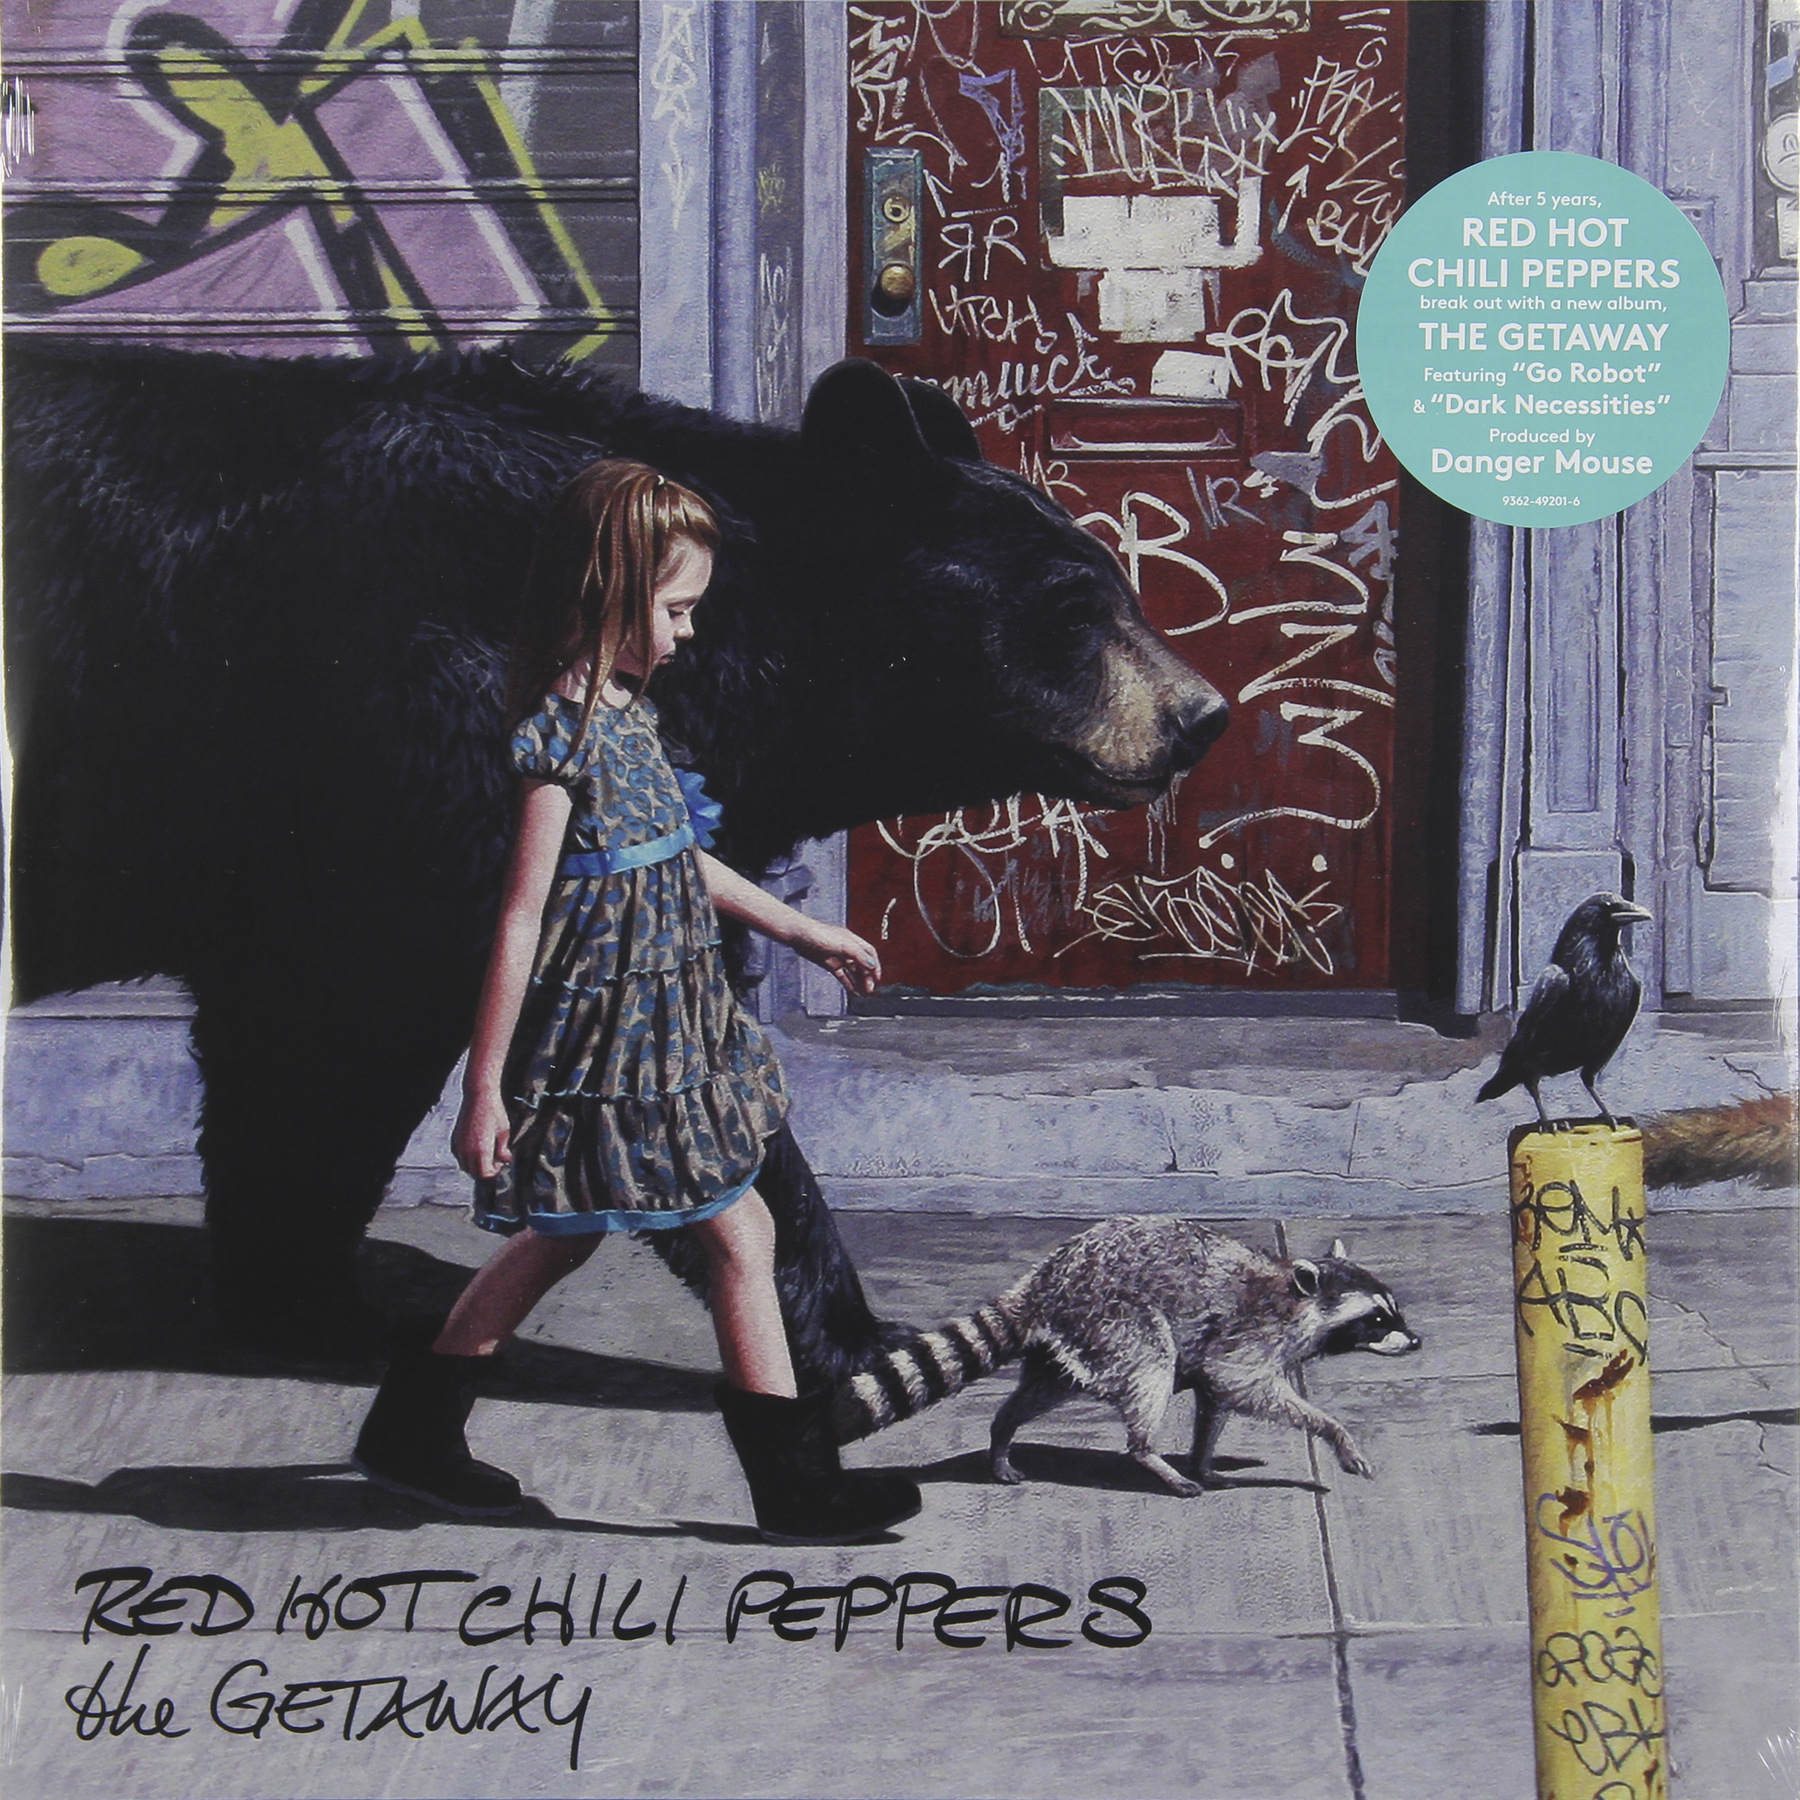 Red hot peppers dark. Red hot Chili Peppers - the Getaway - 2016 - LP. Red hot Chili Peppers the Getaway 2016. The Getaway альбом Red hot Chili Peppers. Red hot Chili Peppers альбомы.